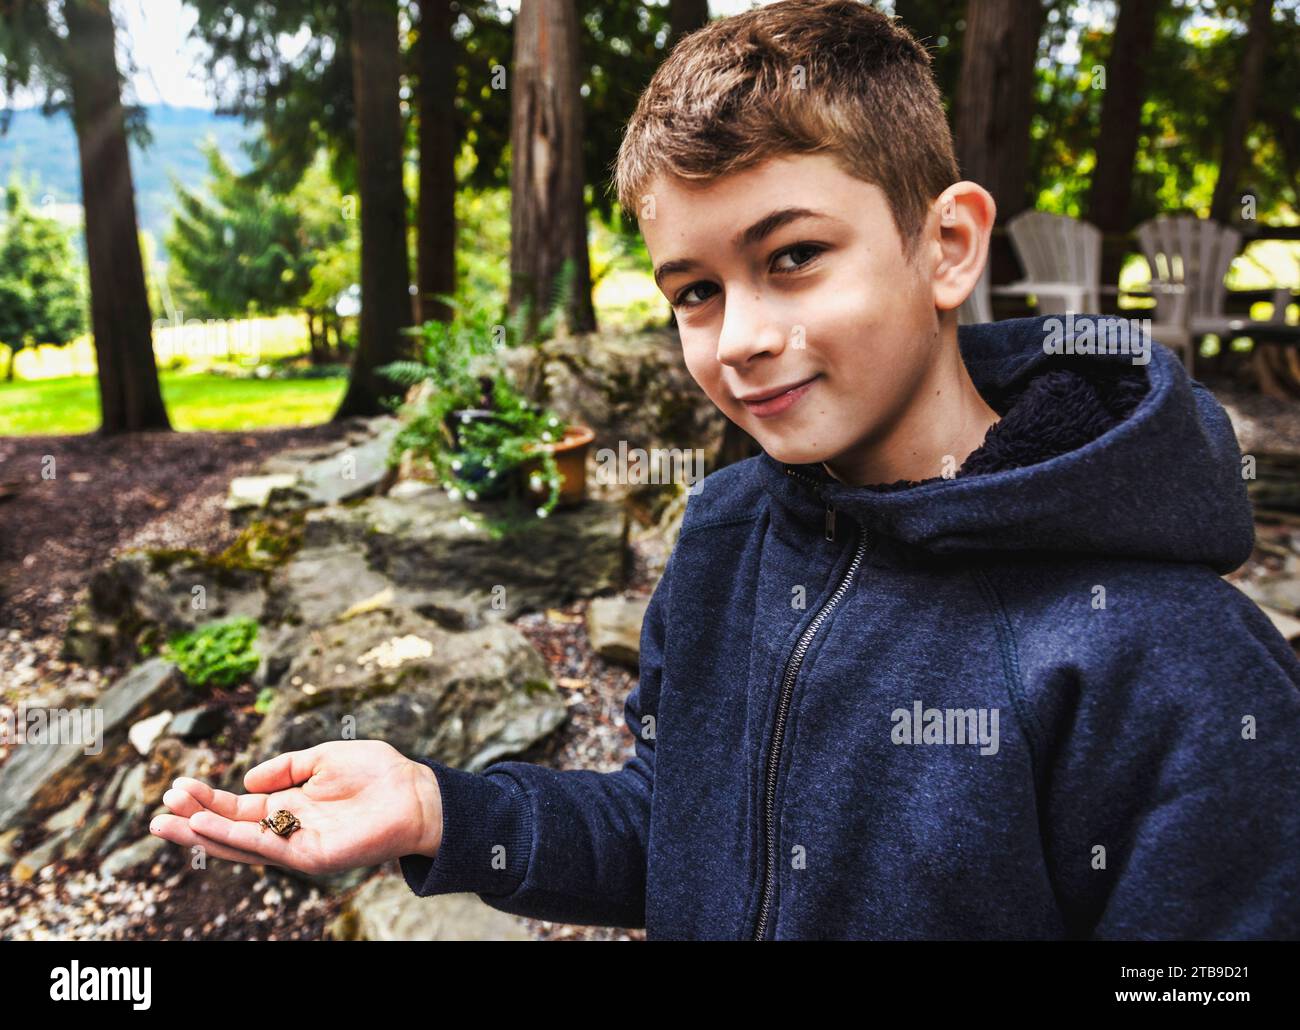 Close-up portrait of a young boy smiling at the camera and holding a small frog in his hand while on vacation; Sicamous, British Columbia, Canada Stock Photo